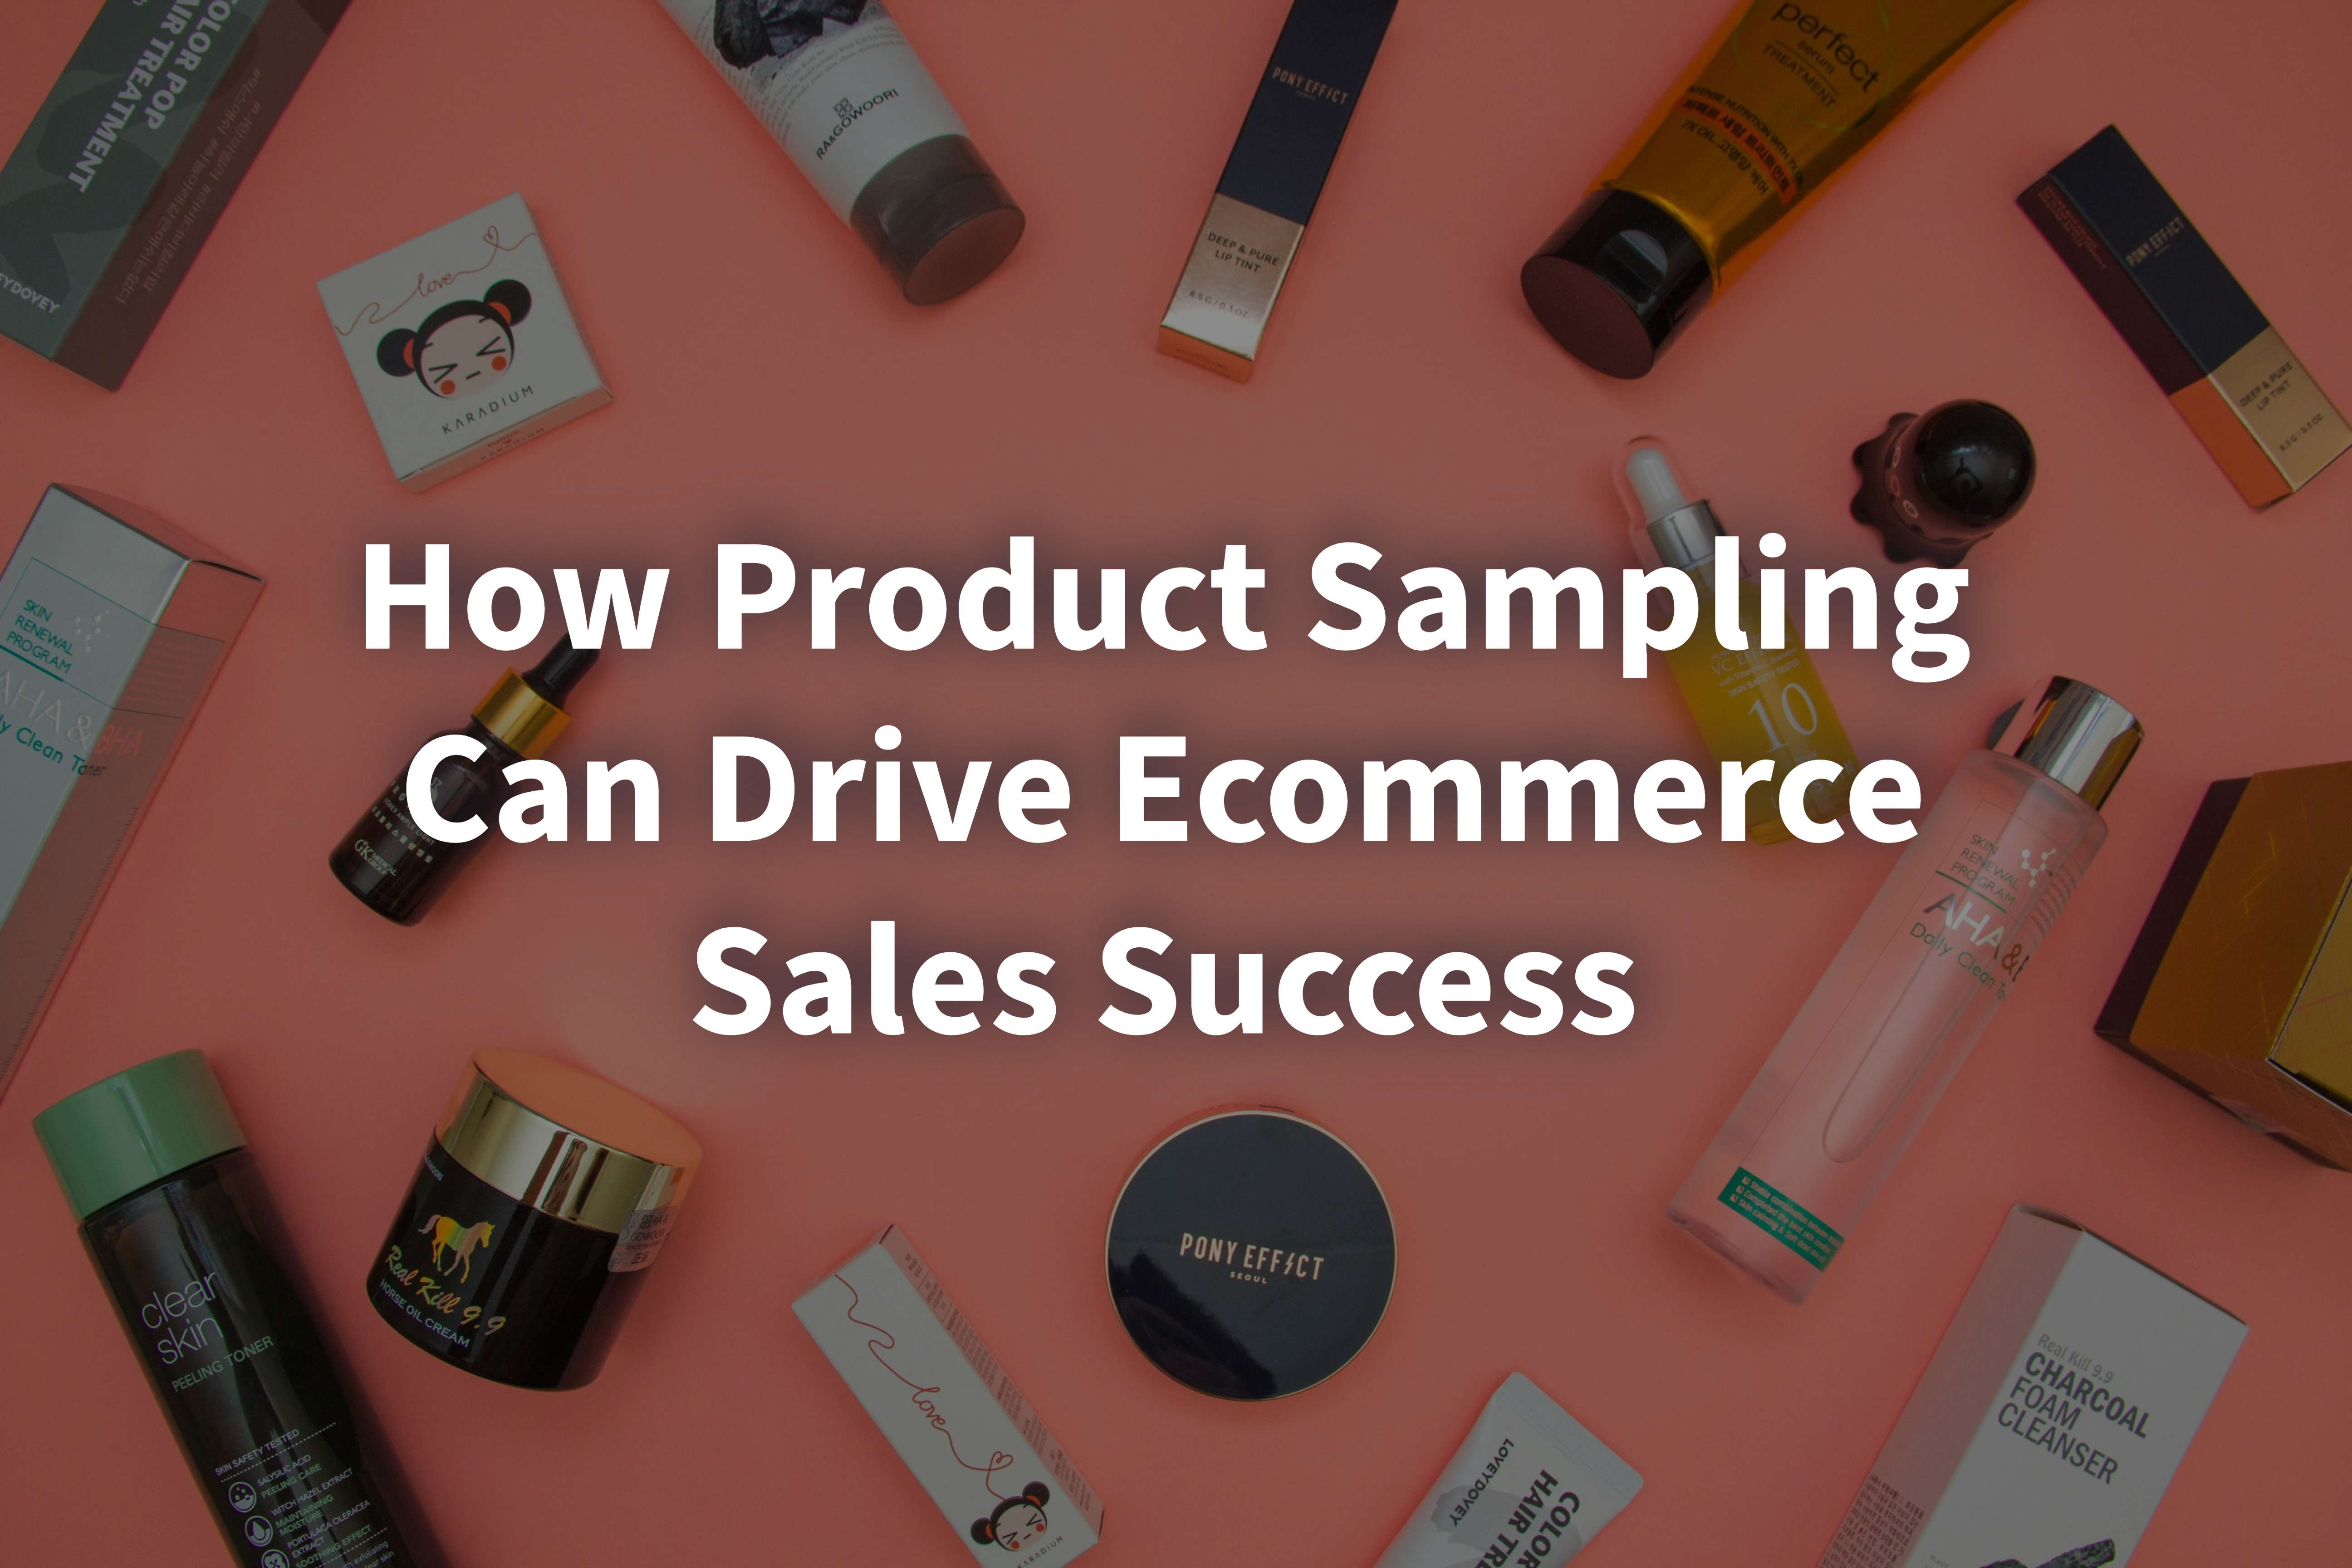 Product sampling for ecommerce